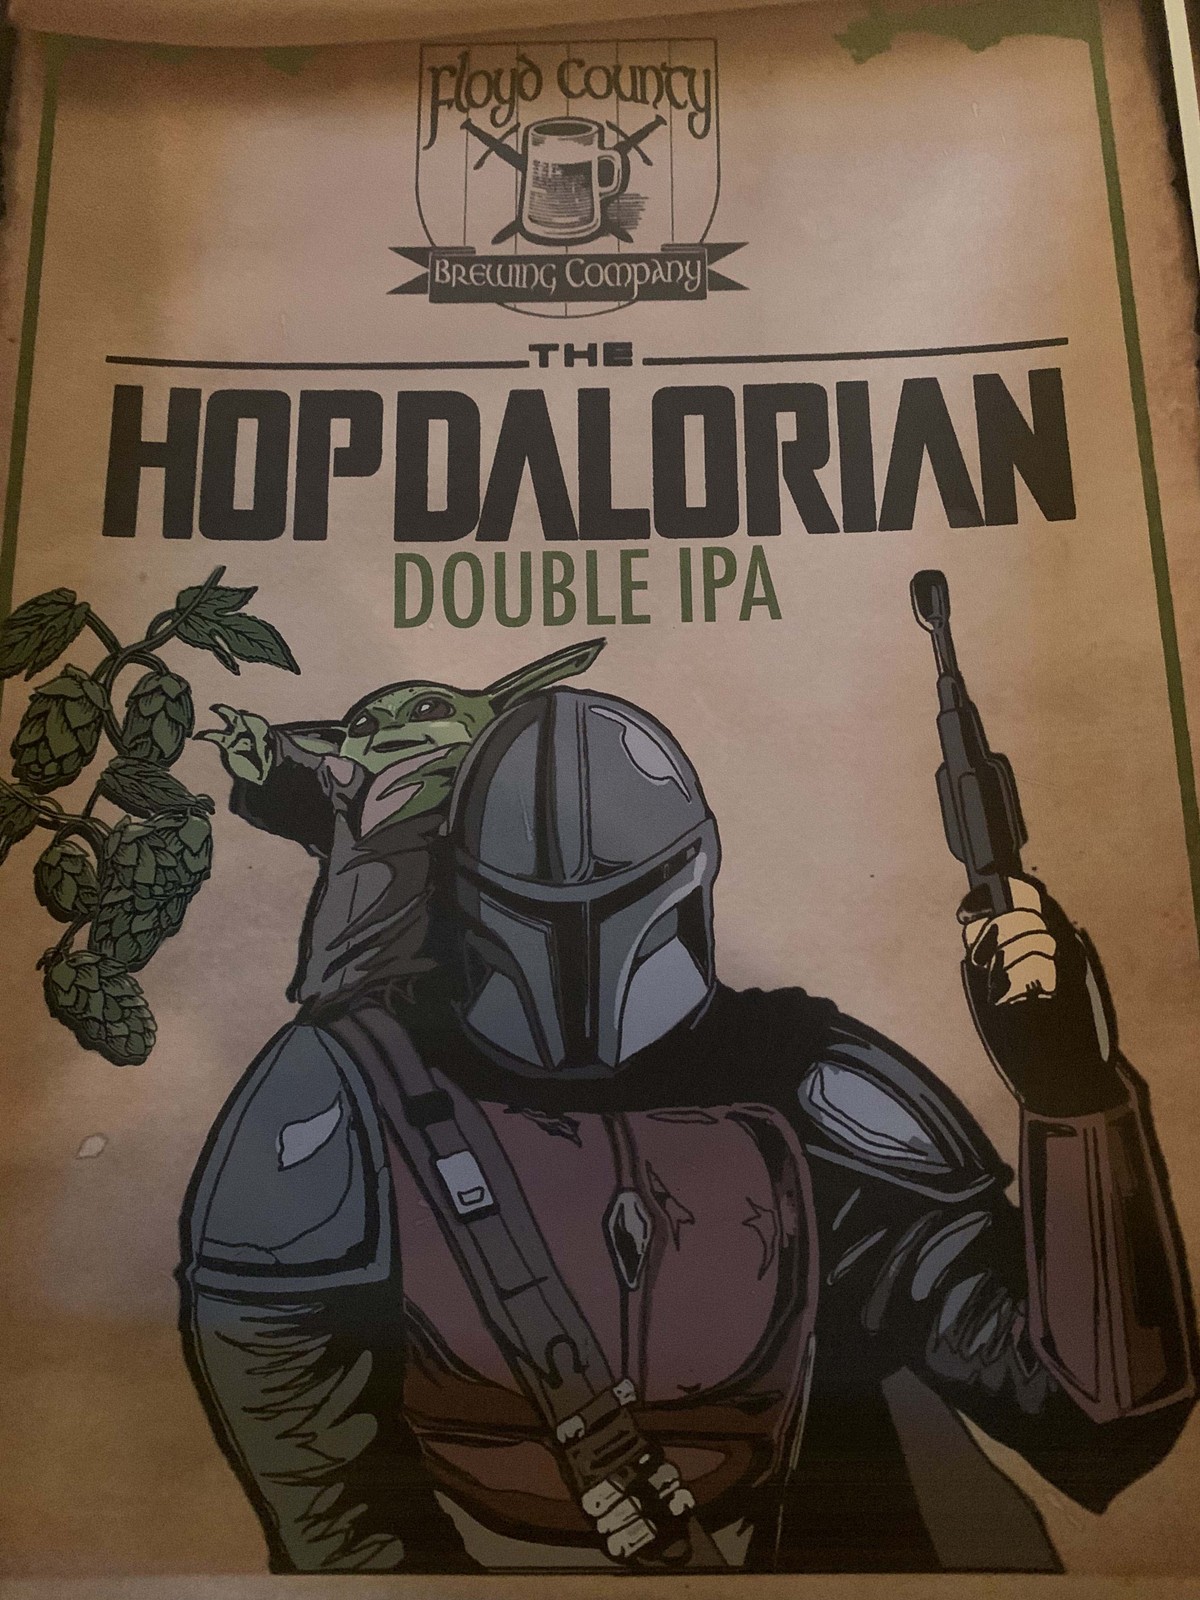 The Hopdalorian double IPA from Floyd County Brewing Co.  |  Photo by Whitney Martin.